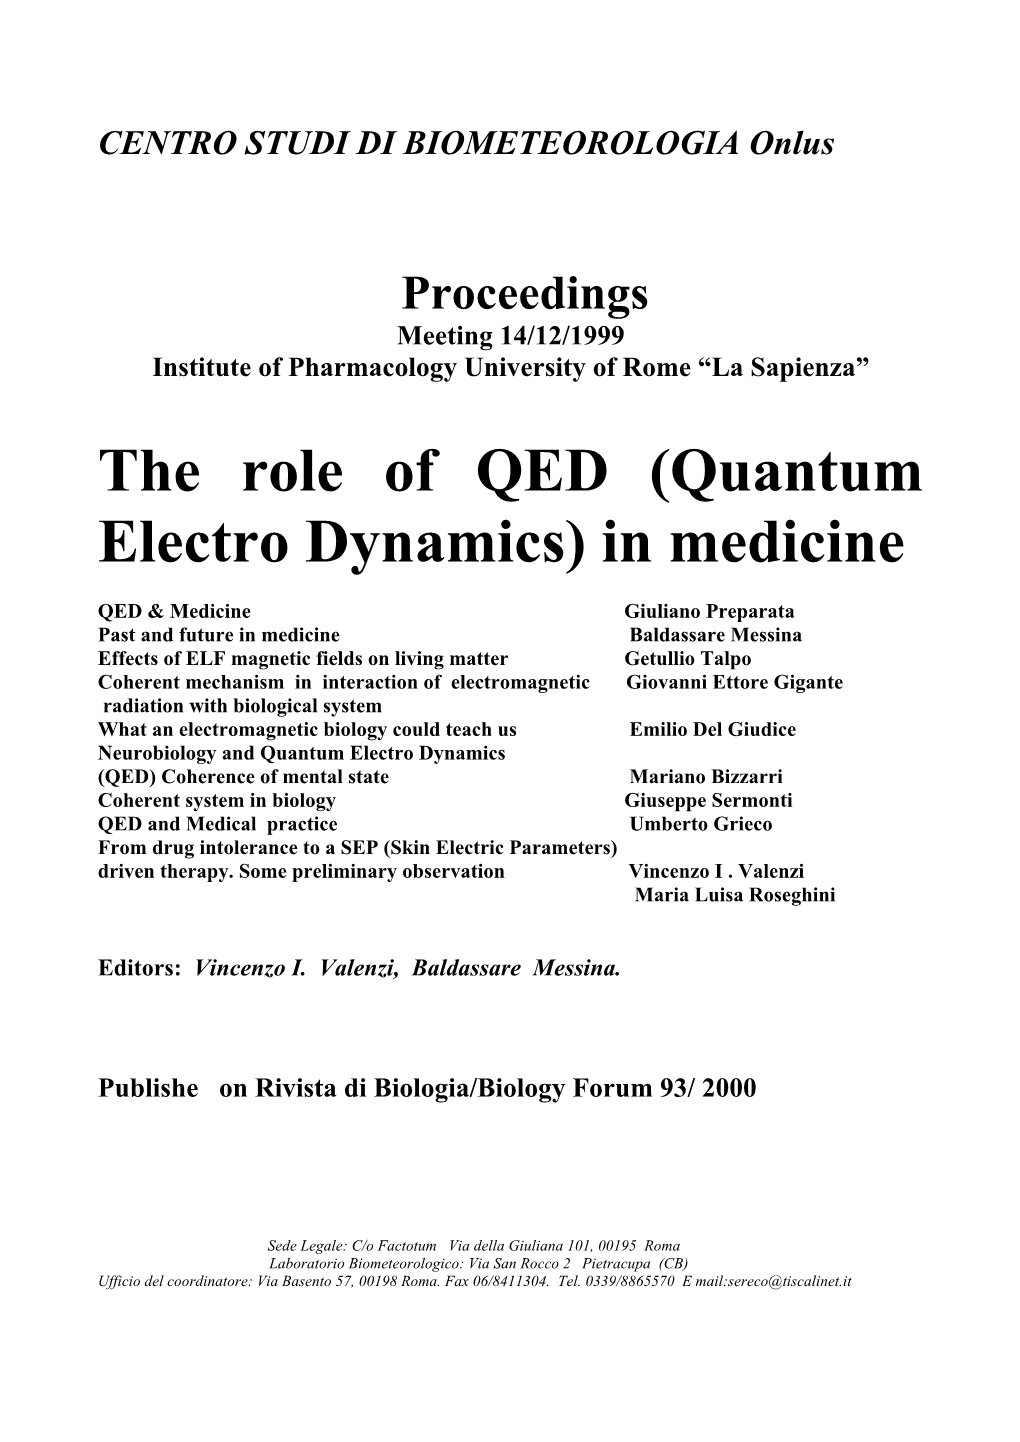 The Role of QED (Quantum Electro Dynamics) in Medicine